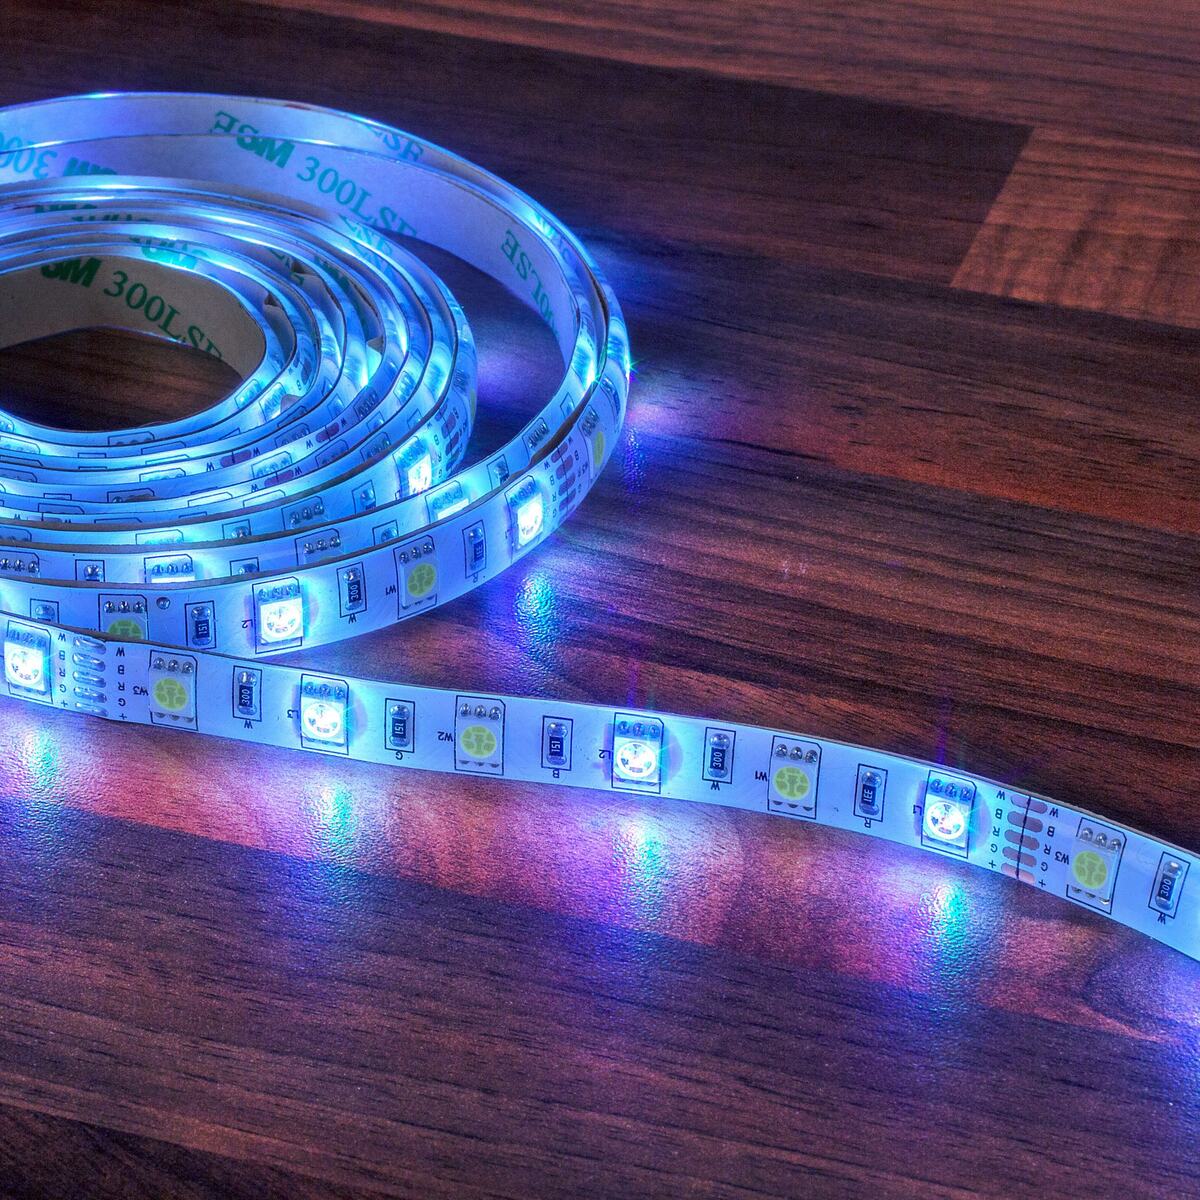 How To Connect Led Strip Without Adapter